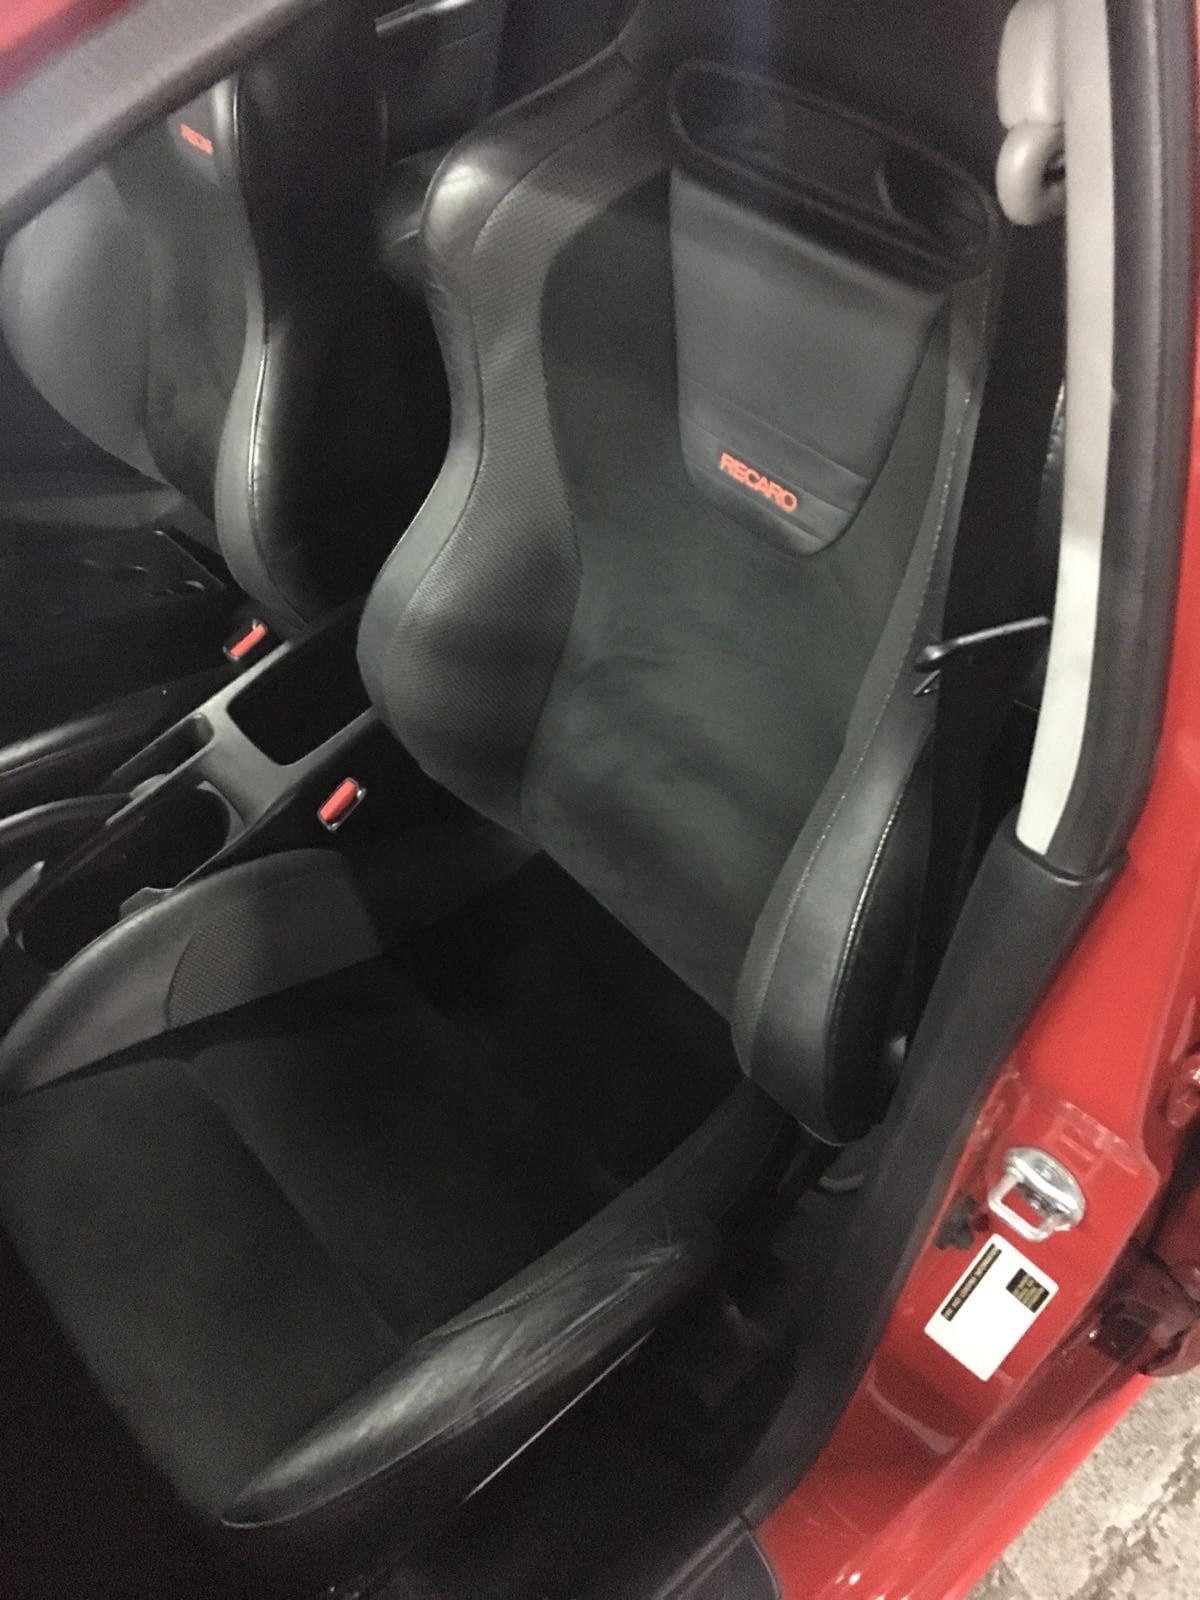 [FS] 2006 Rally Red Evo 9 RS very rare , low mileage, very clean ...